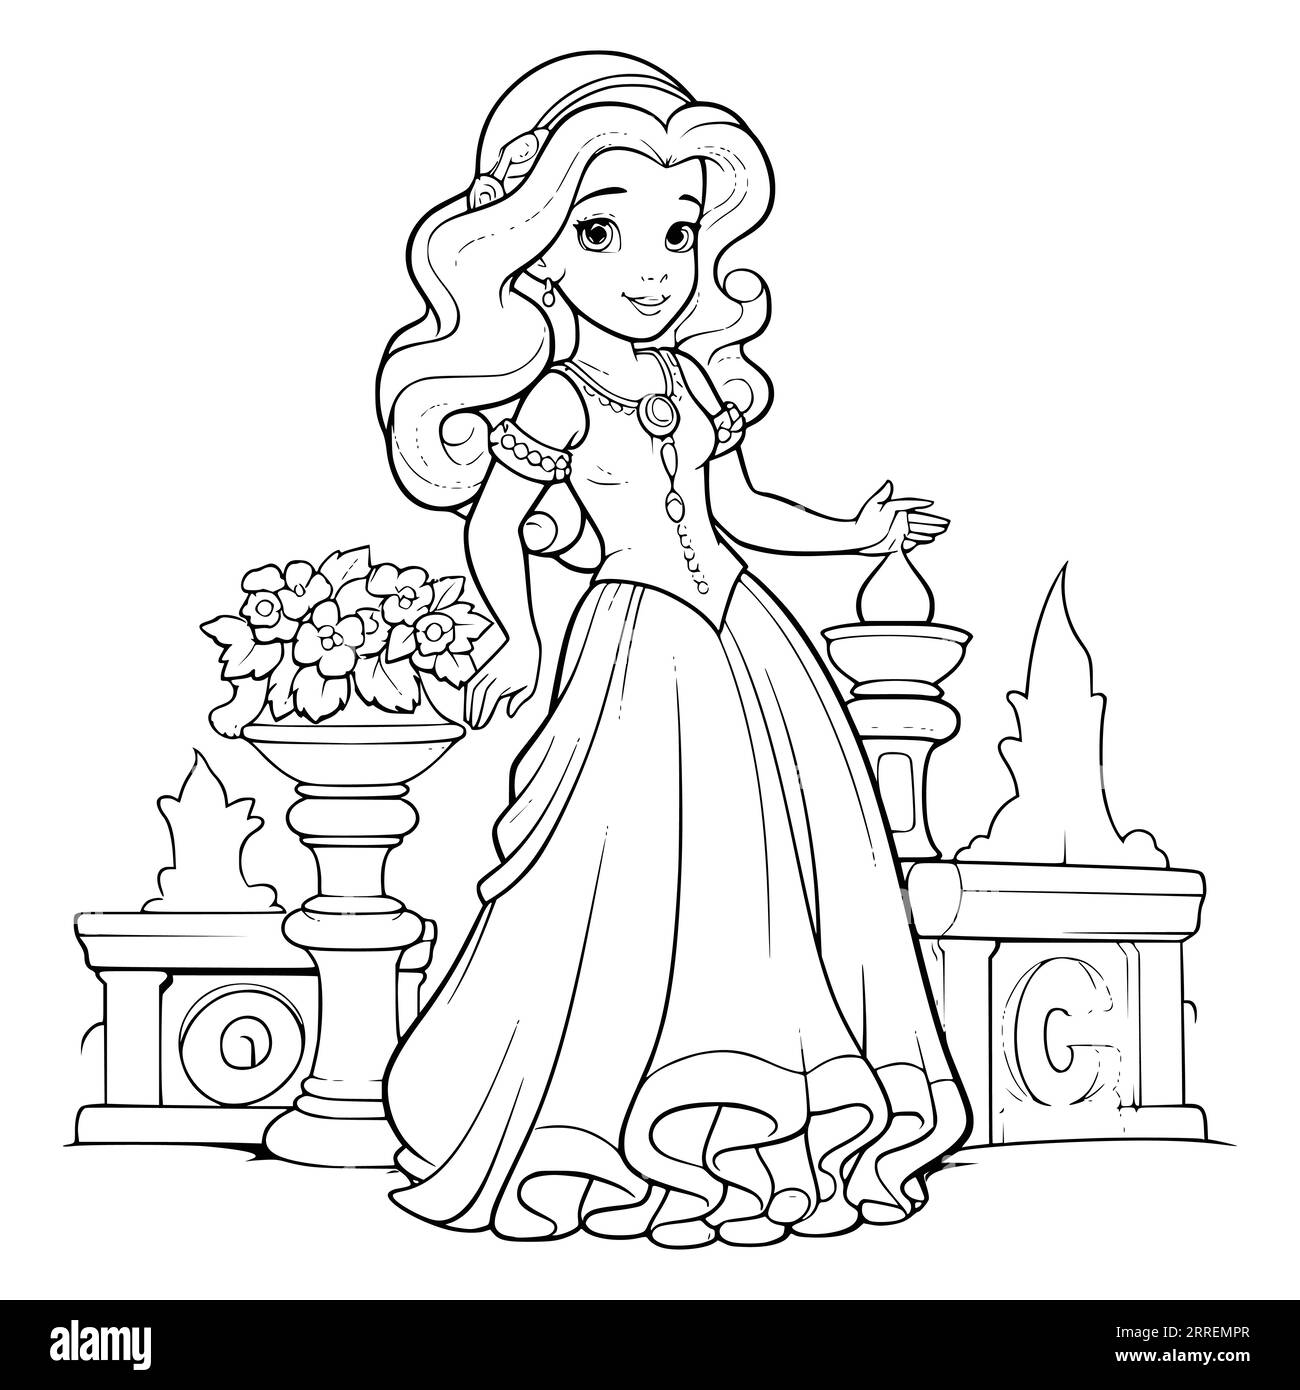 Beautiful Princess In Garden Coloring Pages Drawing For Kids Stock Vector